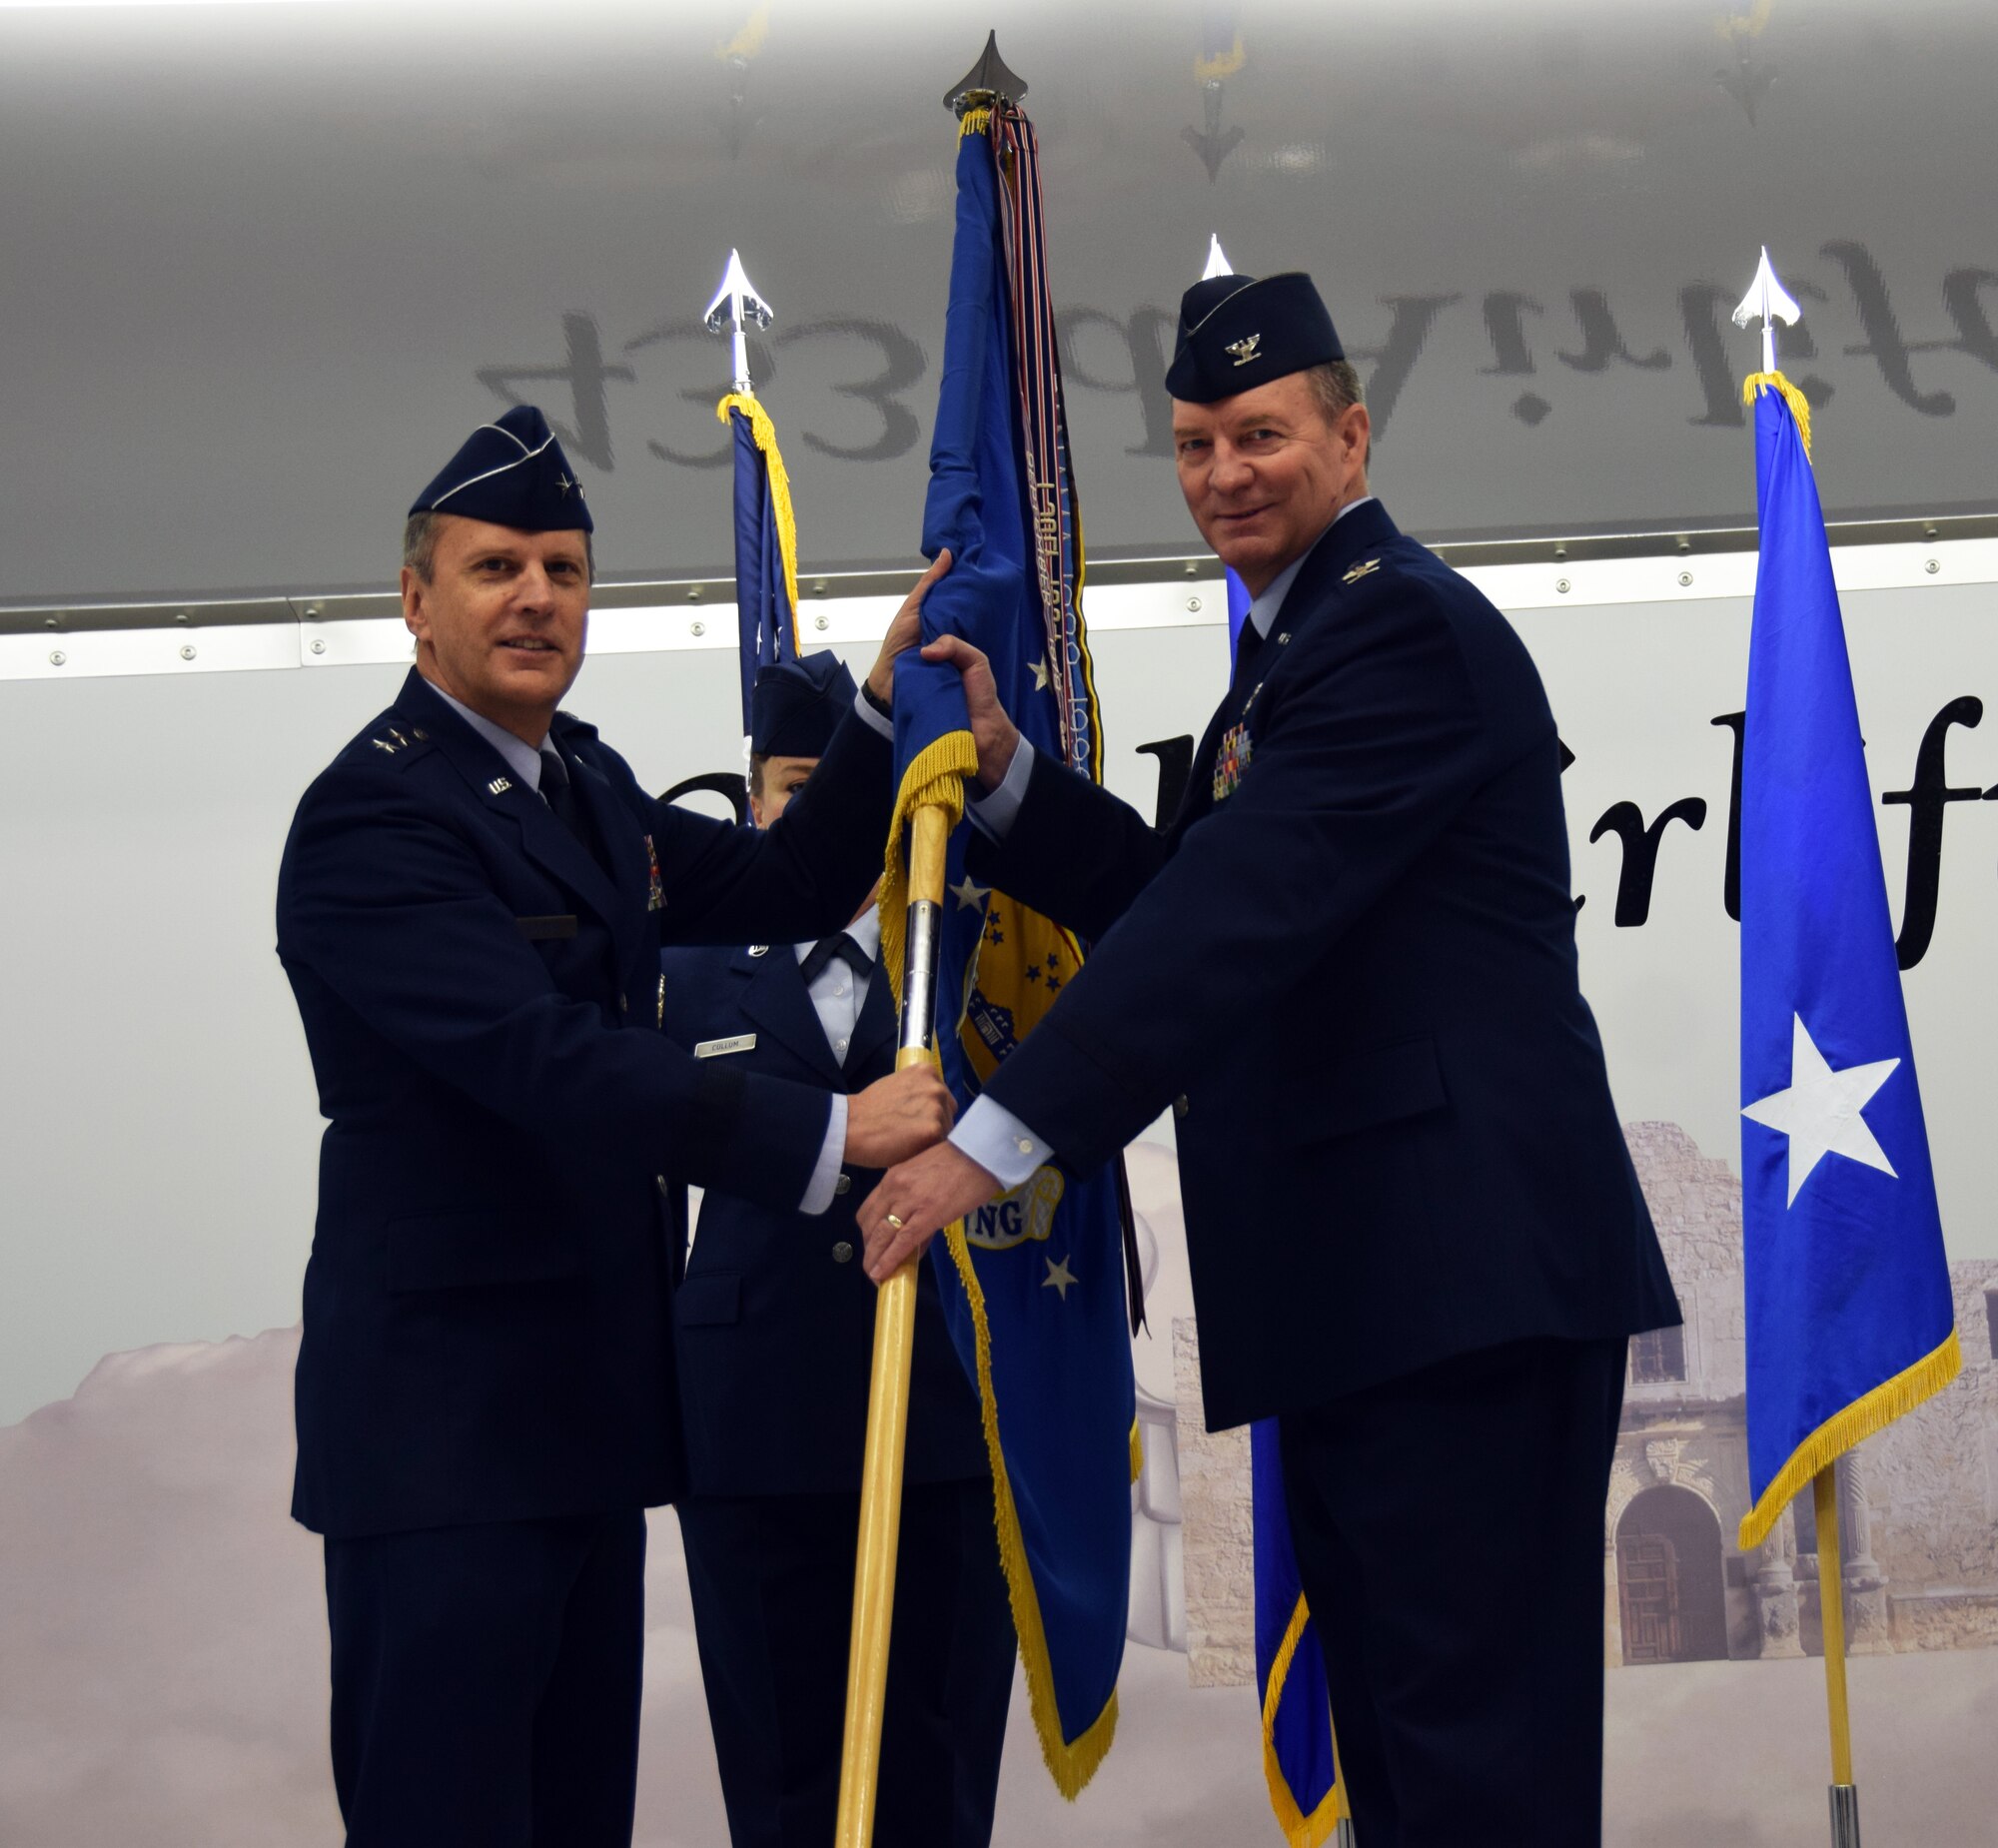 Maj. Gen. Randall A. Ogden, 4th Air Force commander, presents the wing guidon to Col. Terry W. McClain, 433rd Airlift Wing commander, at the 433rd AW change of command ceremony March 3, 2019 at Joint Base San Antonio-Lackland, Texas.